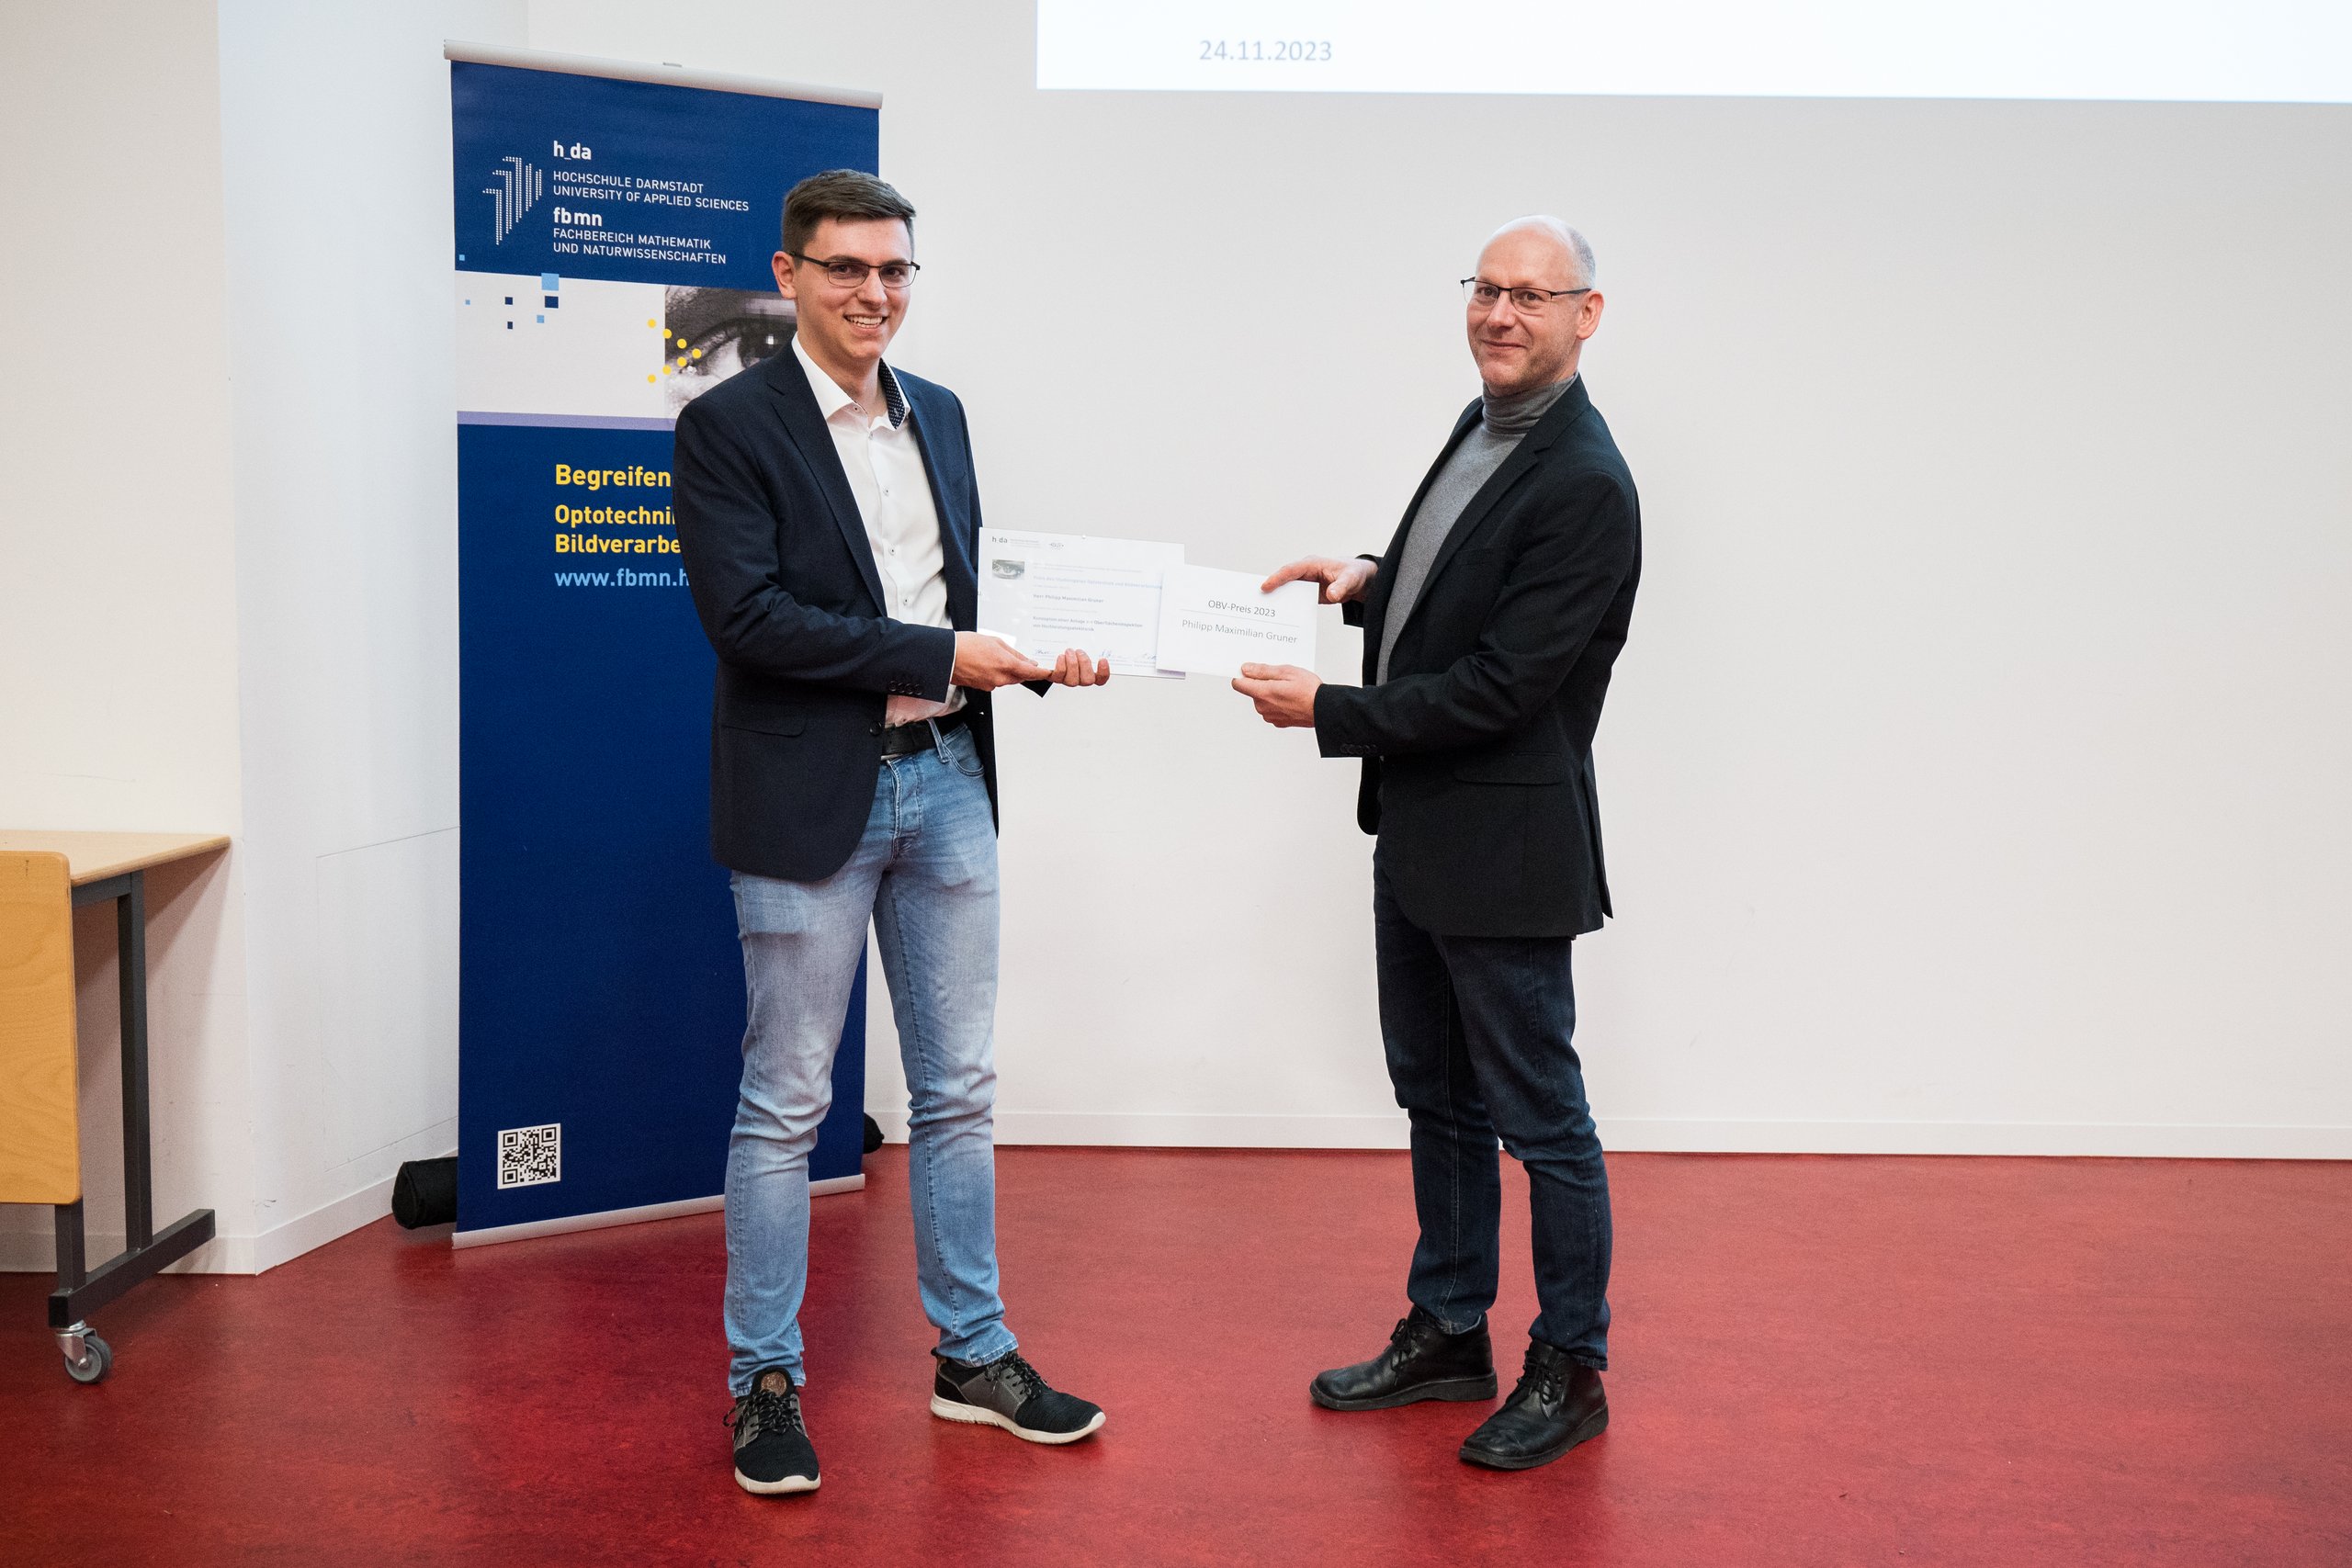 Awarding of the OBV Prize for outstanding theses 2022/23 to Philipp Gruner